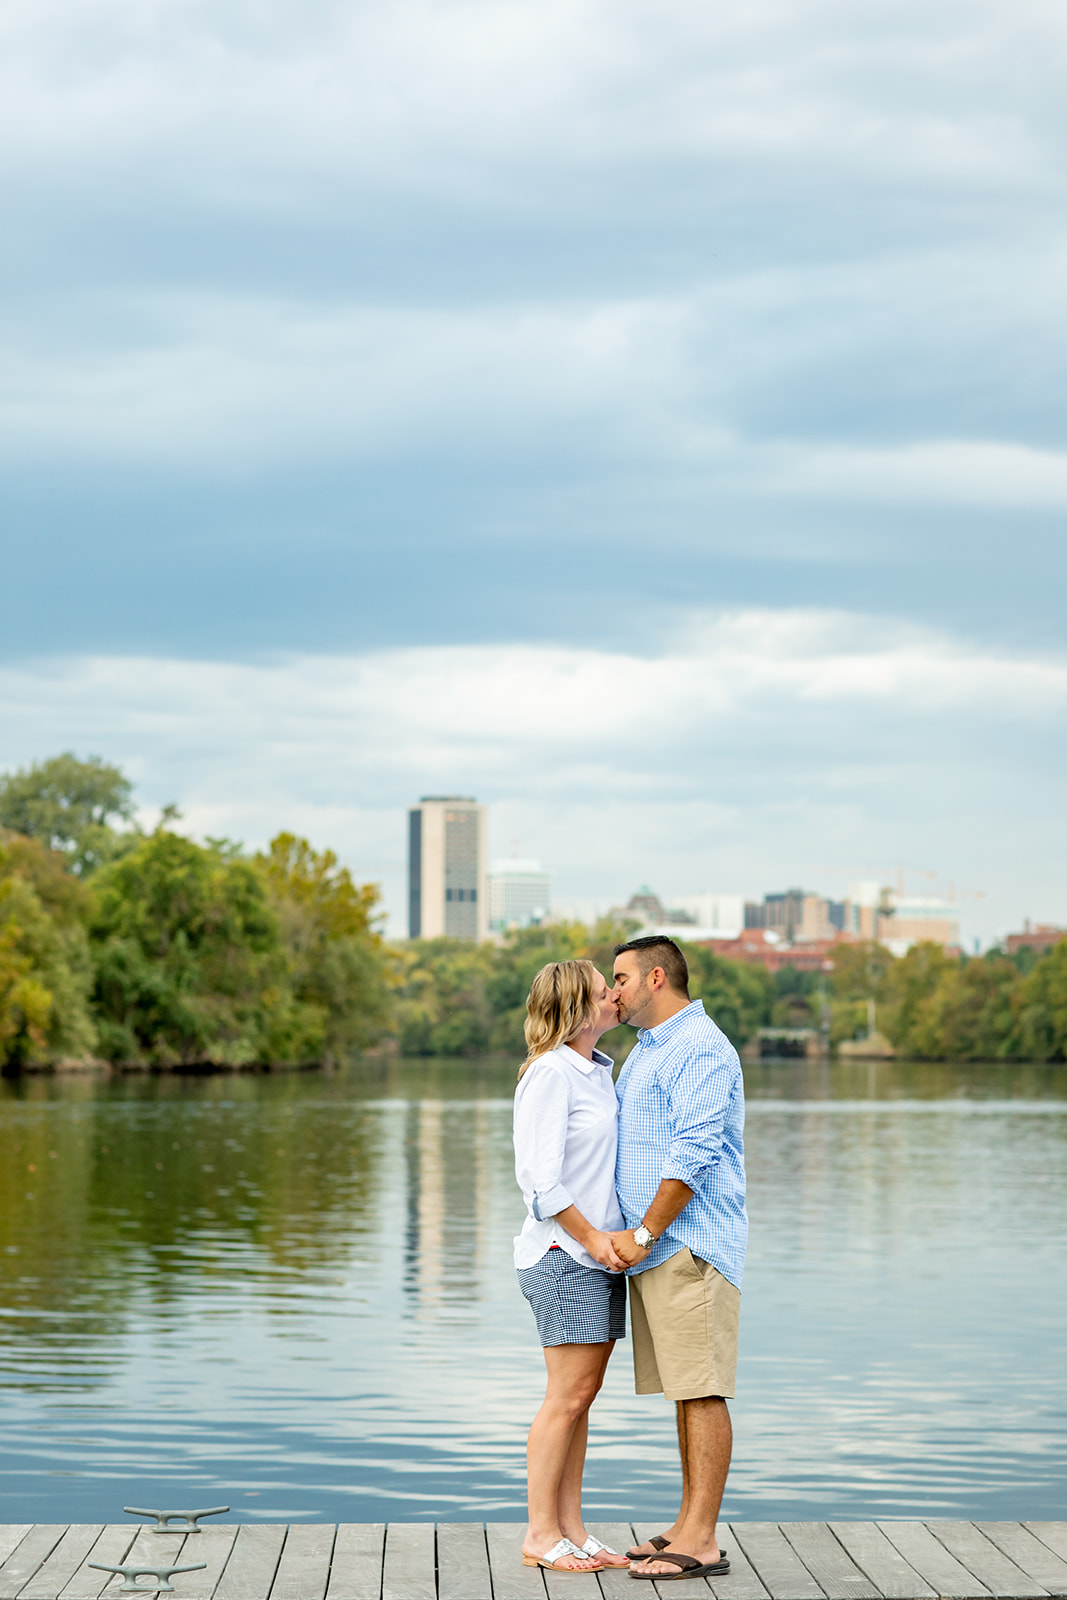 Heather  Kevins Engagement Shoot at The Boathouse at Rocketts Landing - Image Property of www.j-dphoto.com